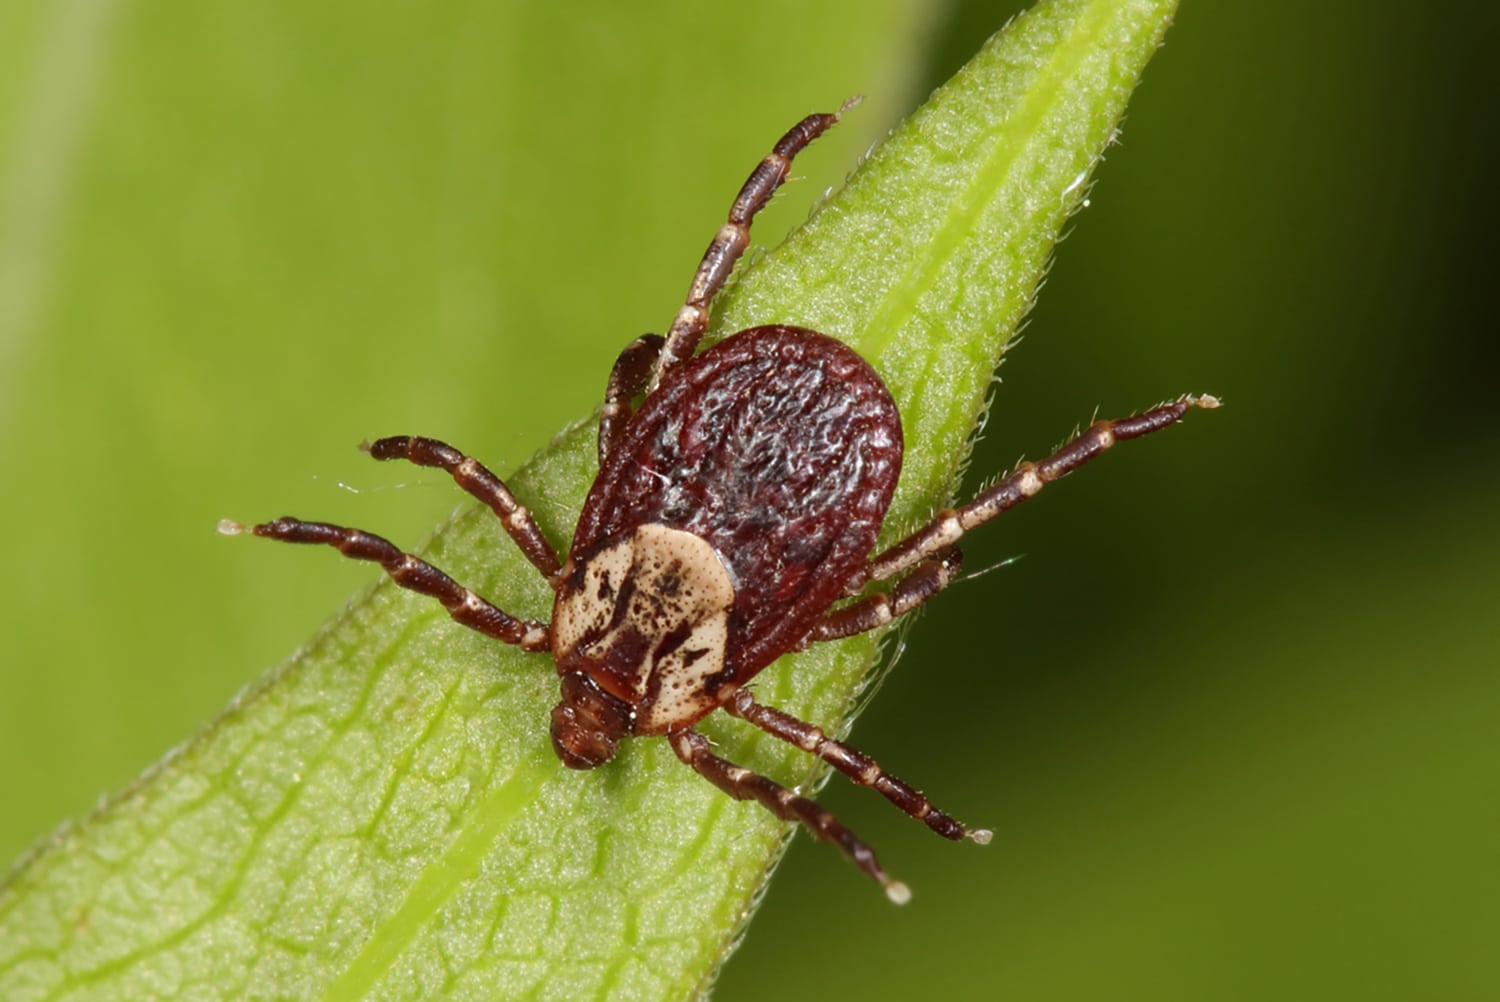 horizontal photo of an american dog tick on a leaf, with an out of focus green background